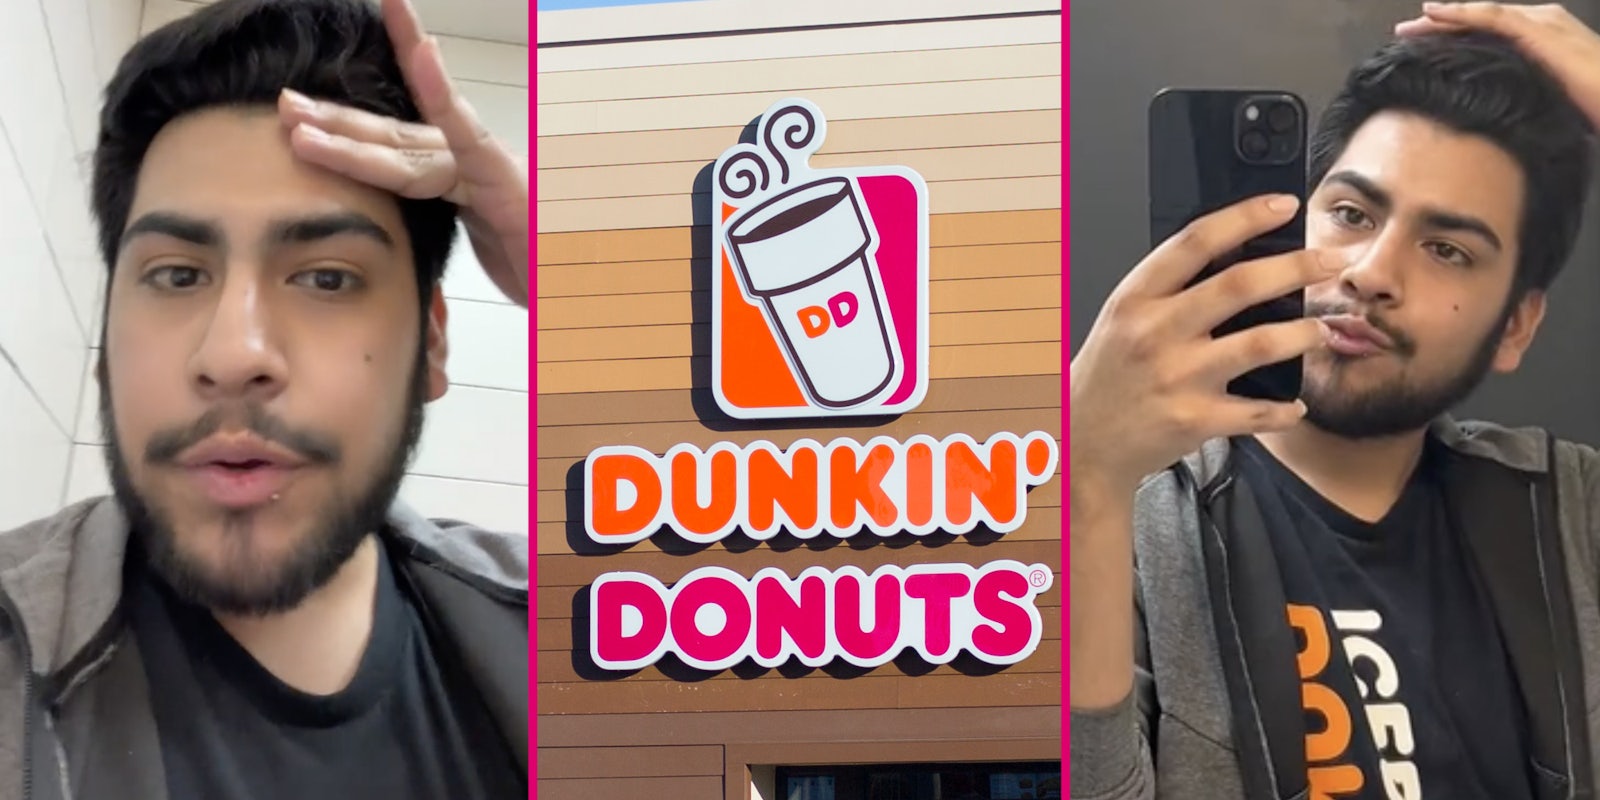 Man talking(L), Dunkin Donuts storefront(c), Man posing with phone(r)